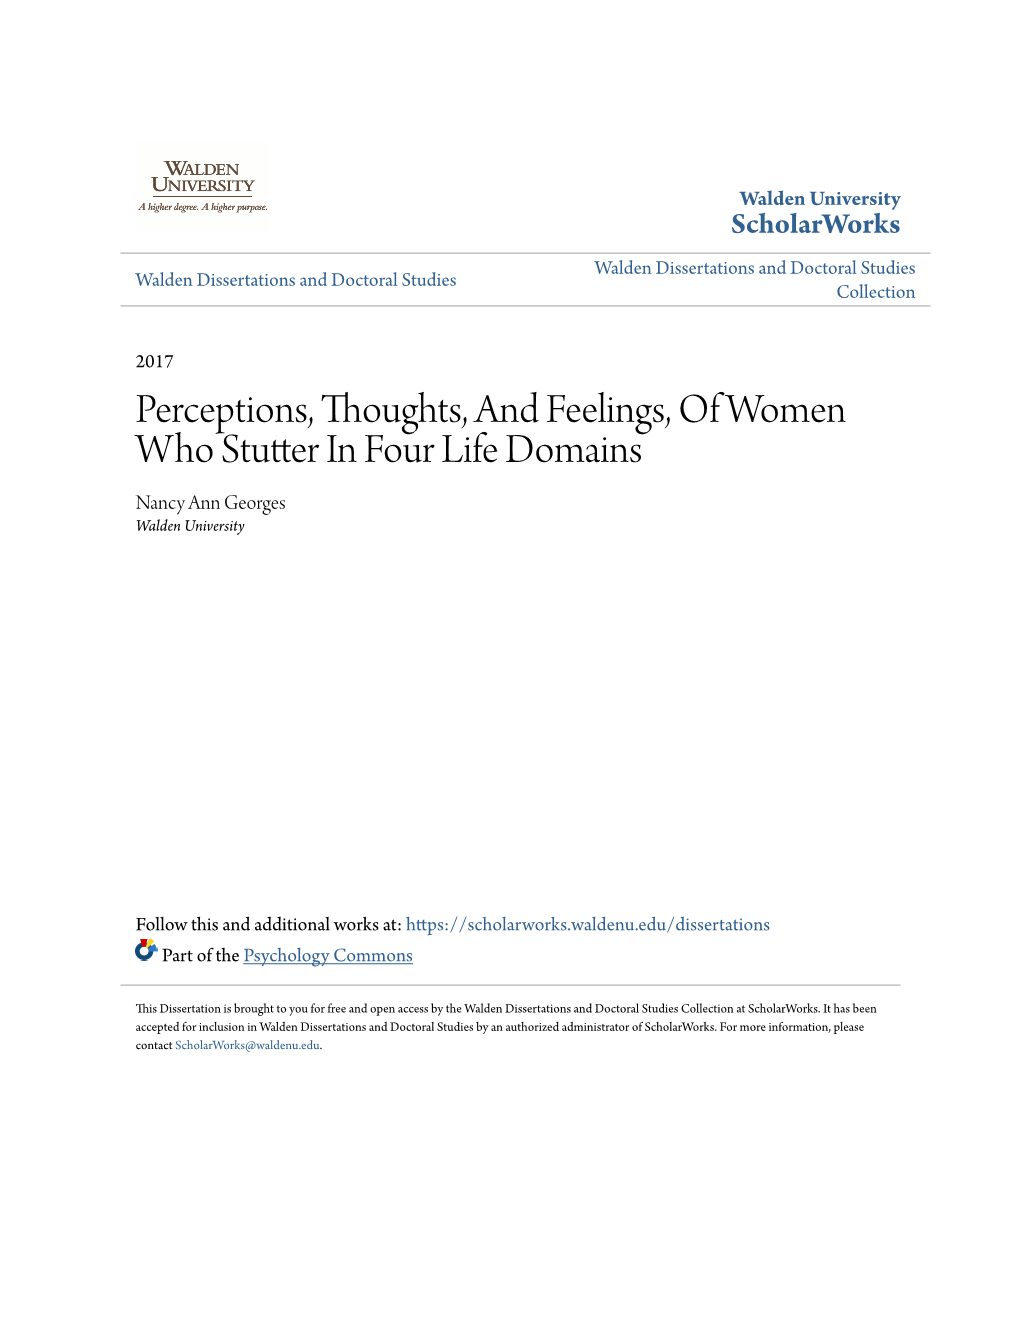 Perceptions, Thoughts, and Feelings, of Women Who Stutter in Four Life Domains Nancy Ann Georges Walden University